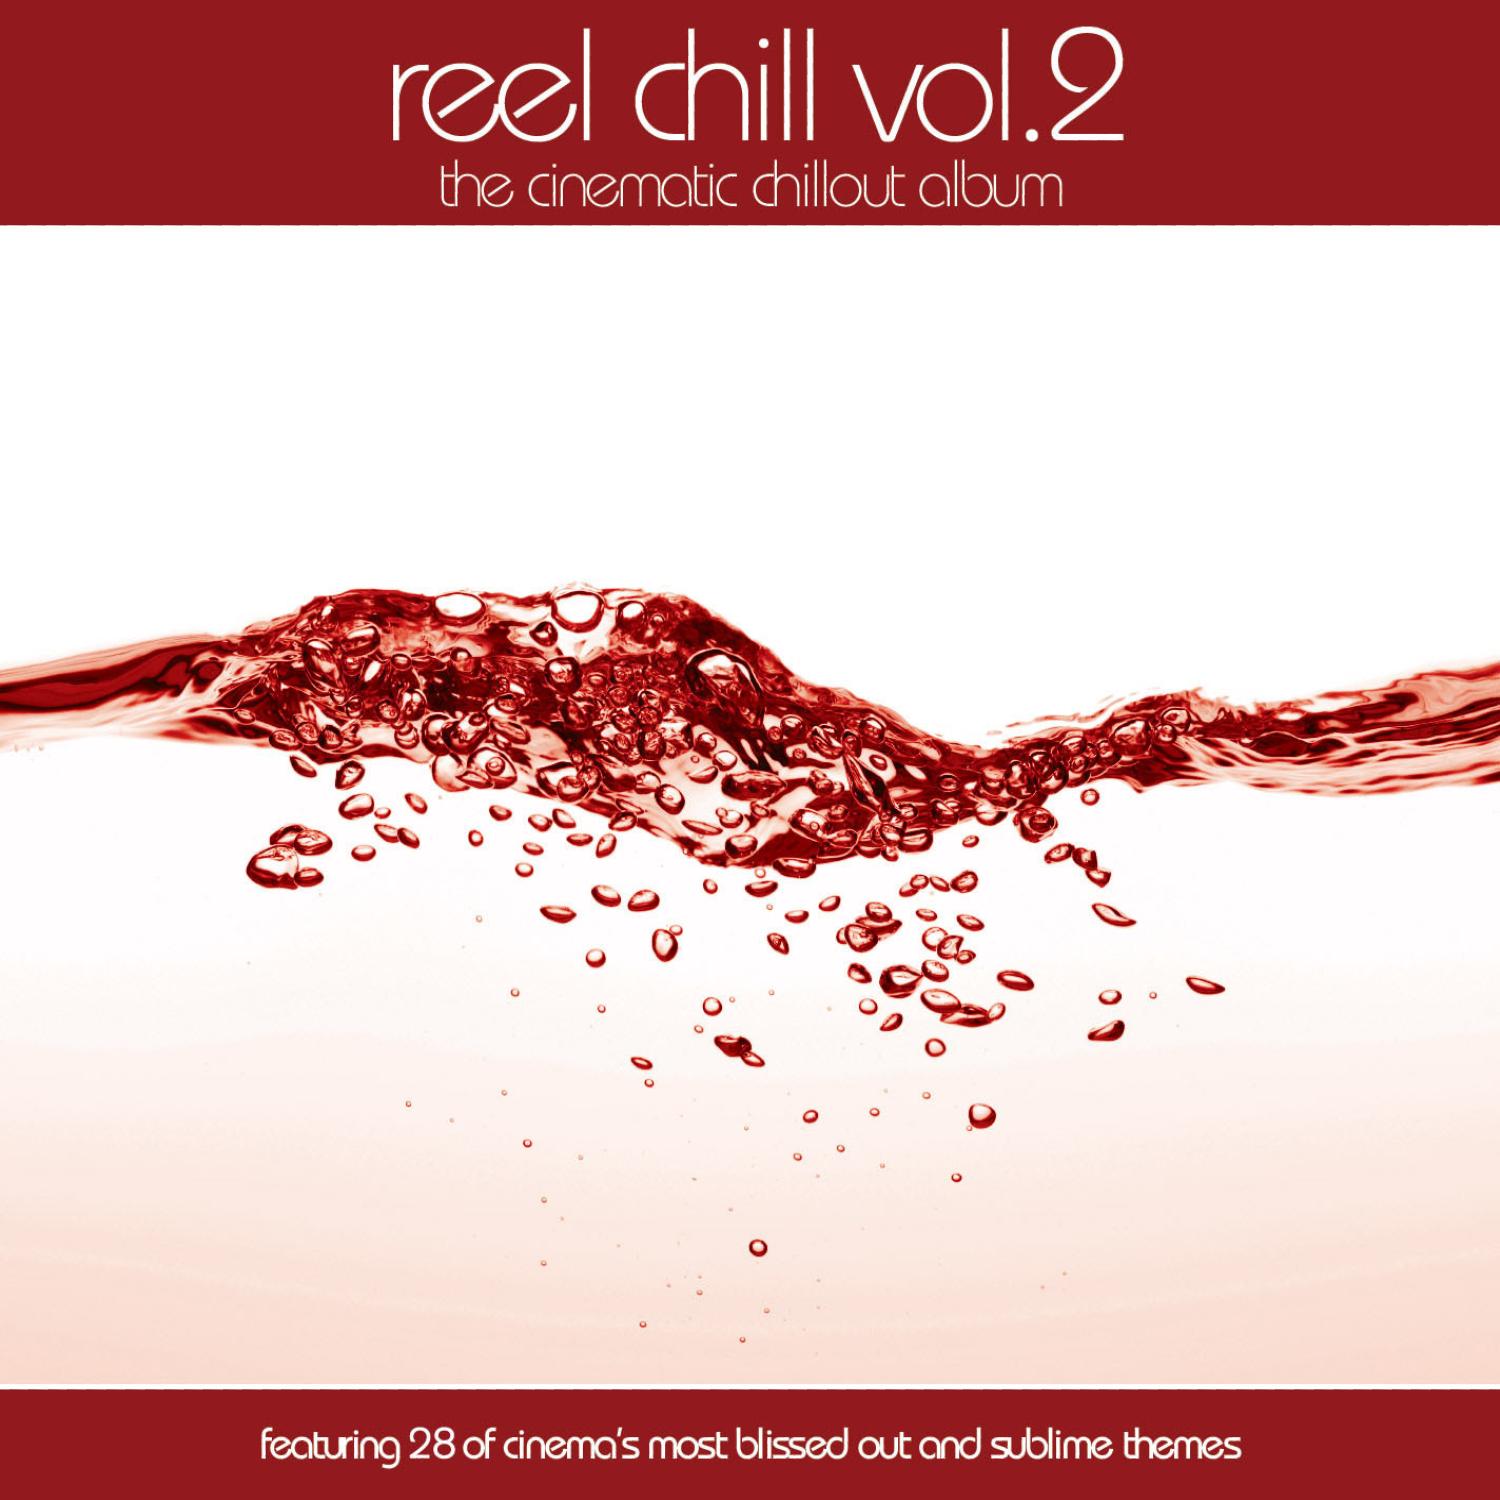 Reel Chill 2: The Cinematic Chillout Album